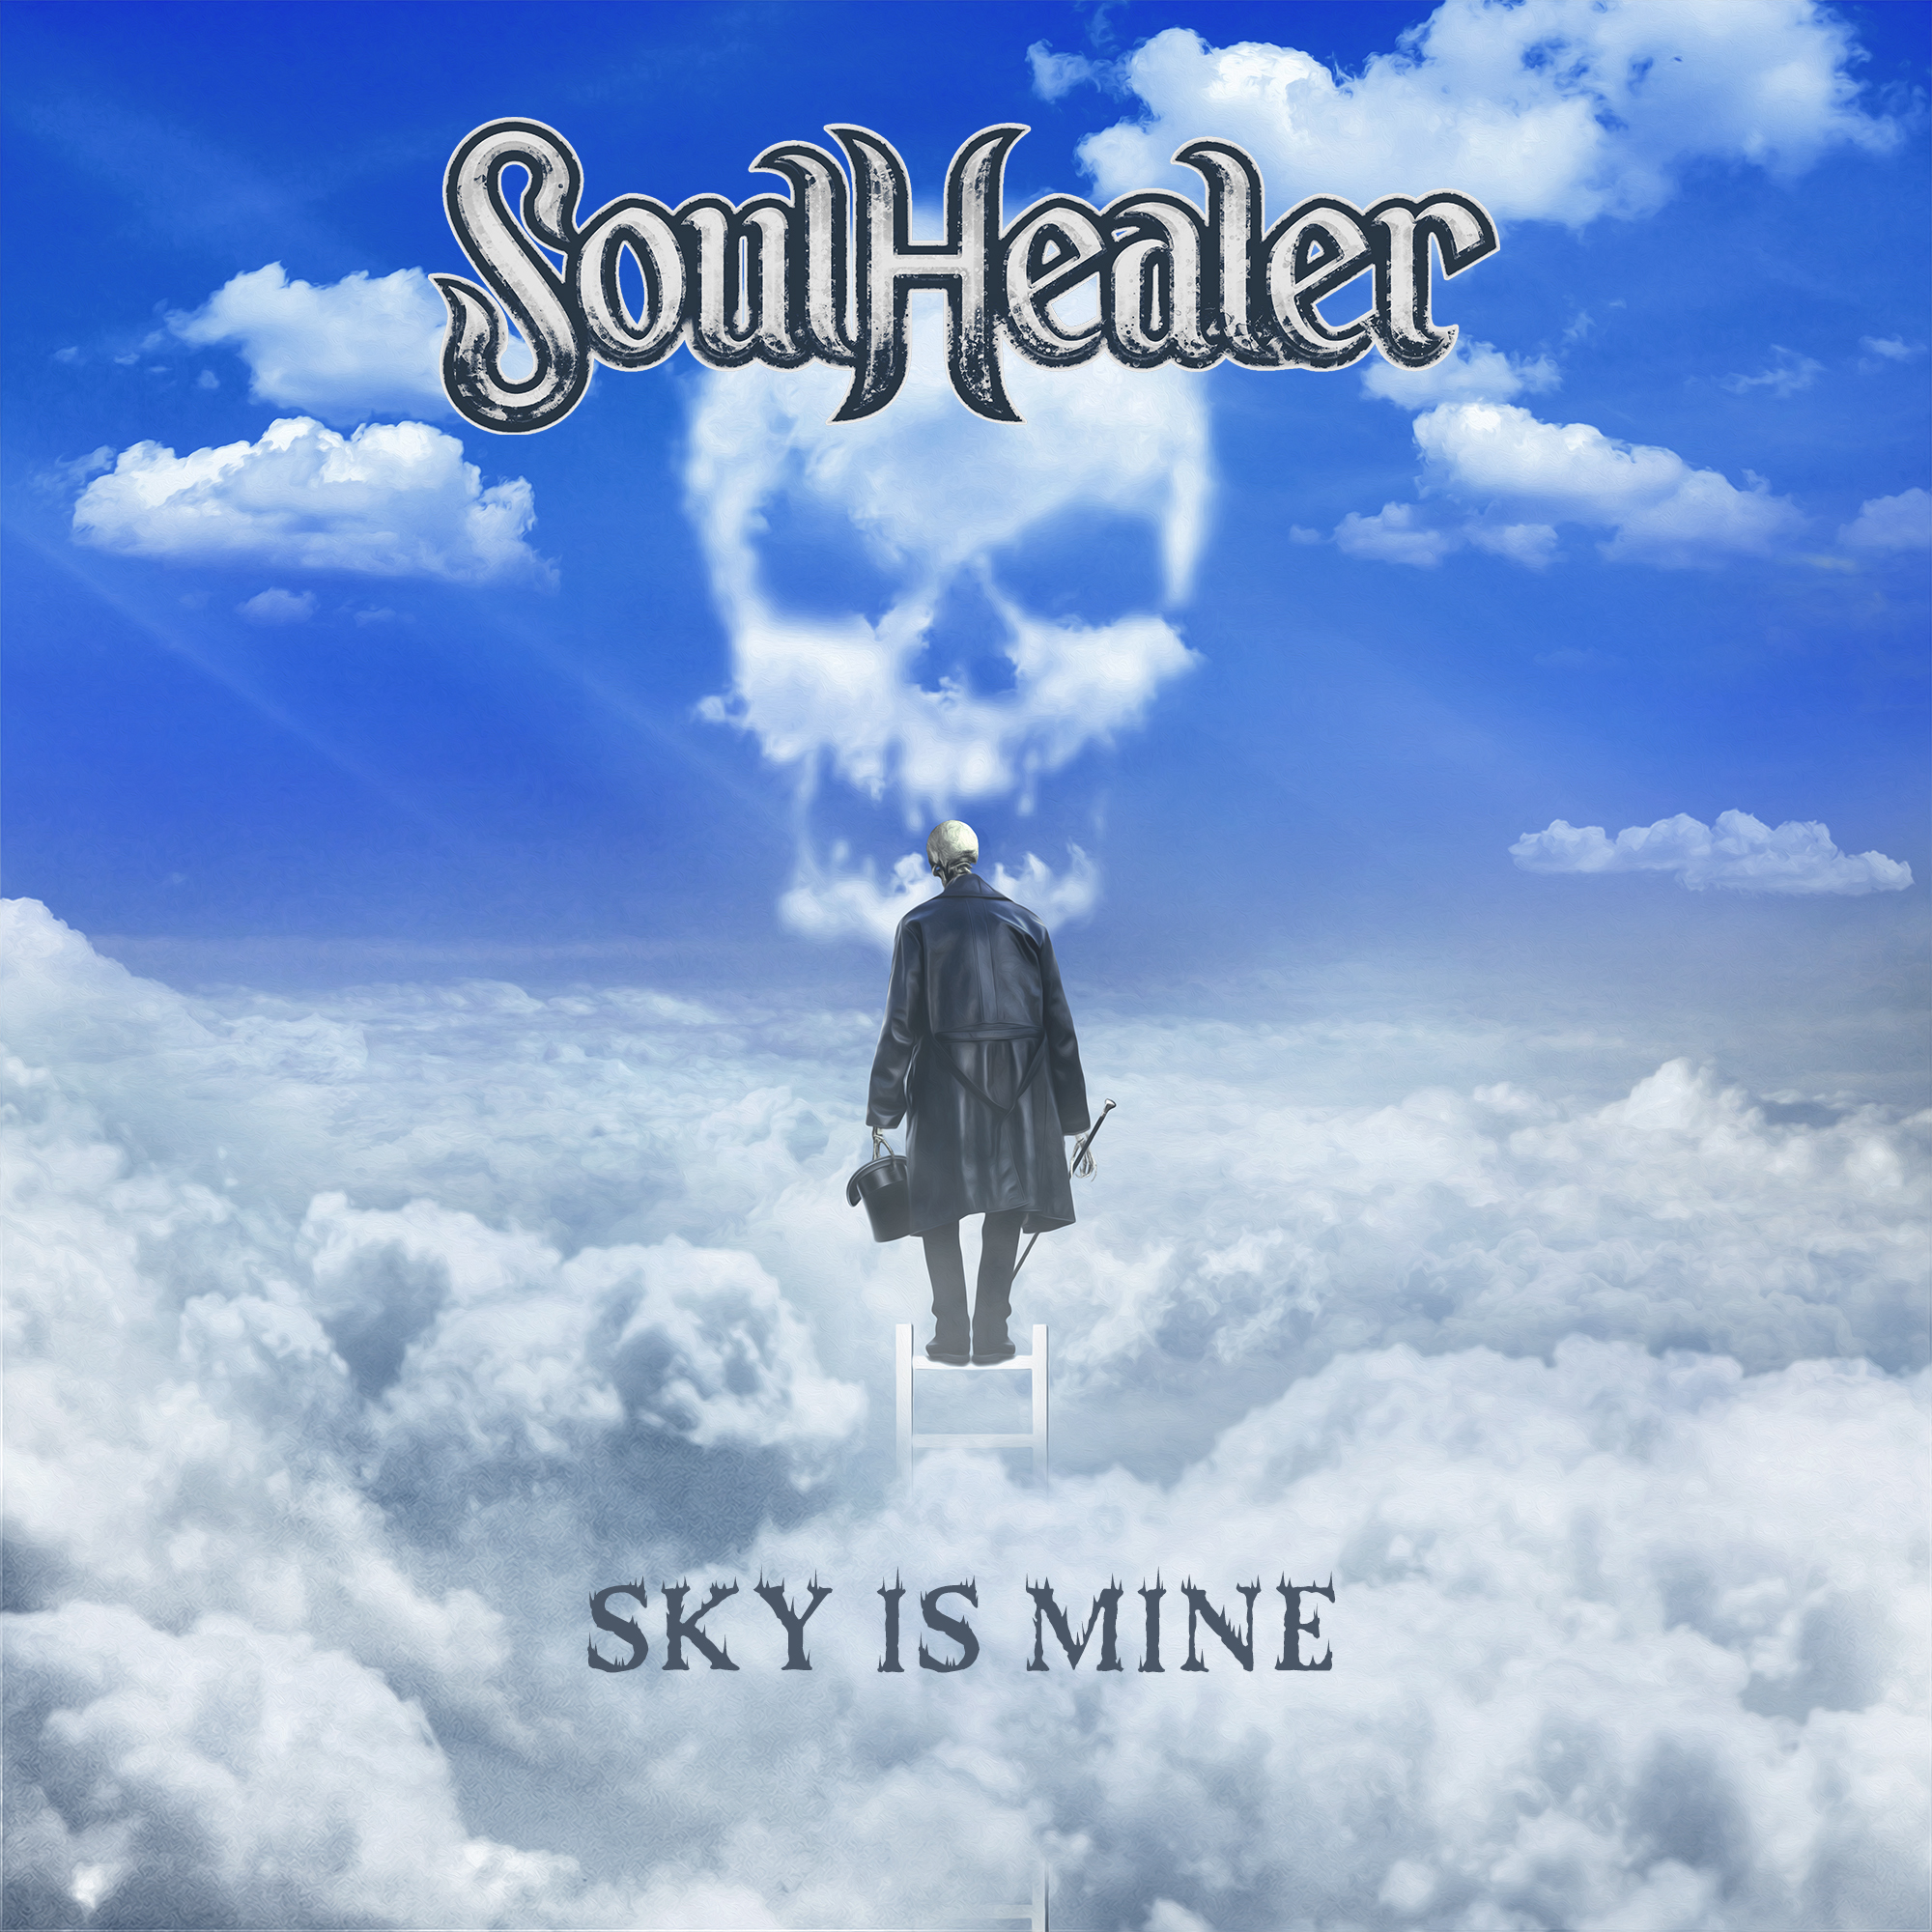 forever skies release date